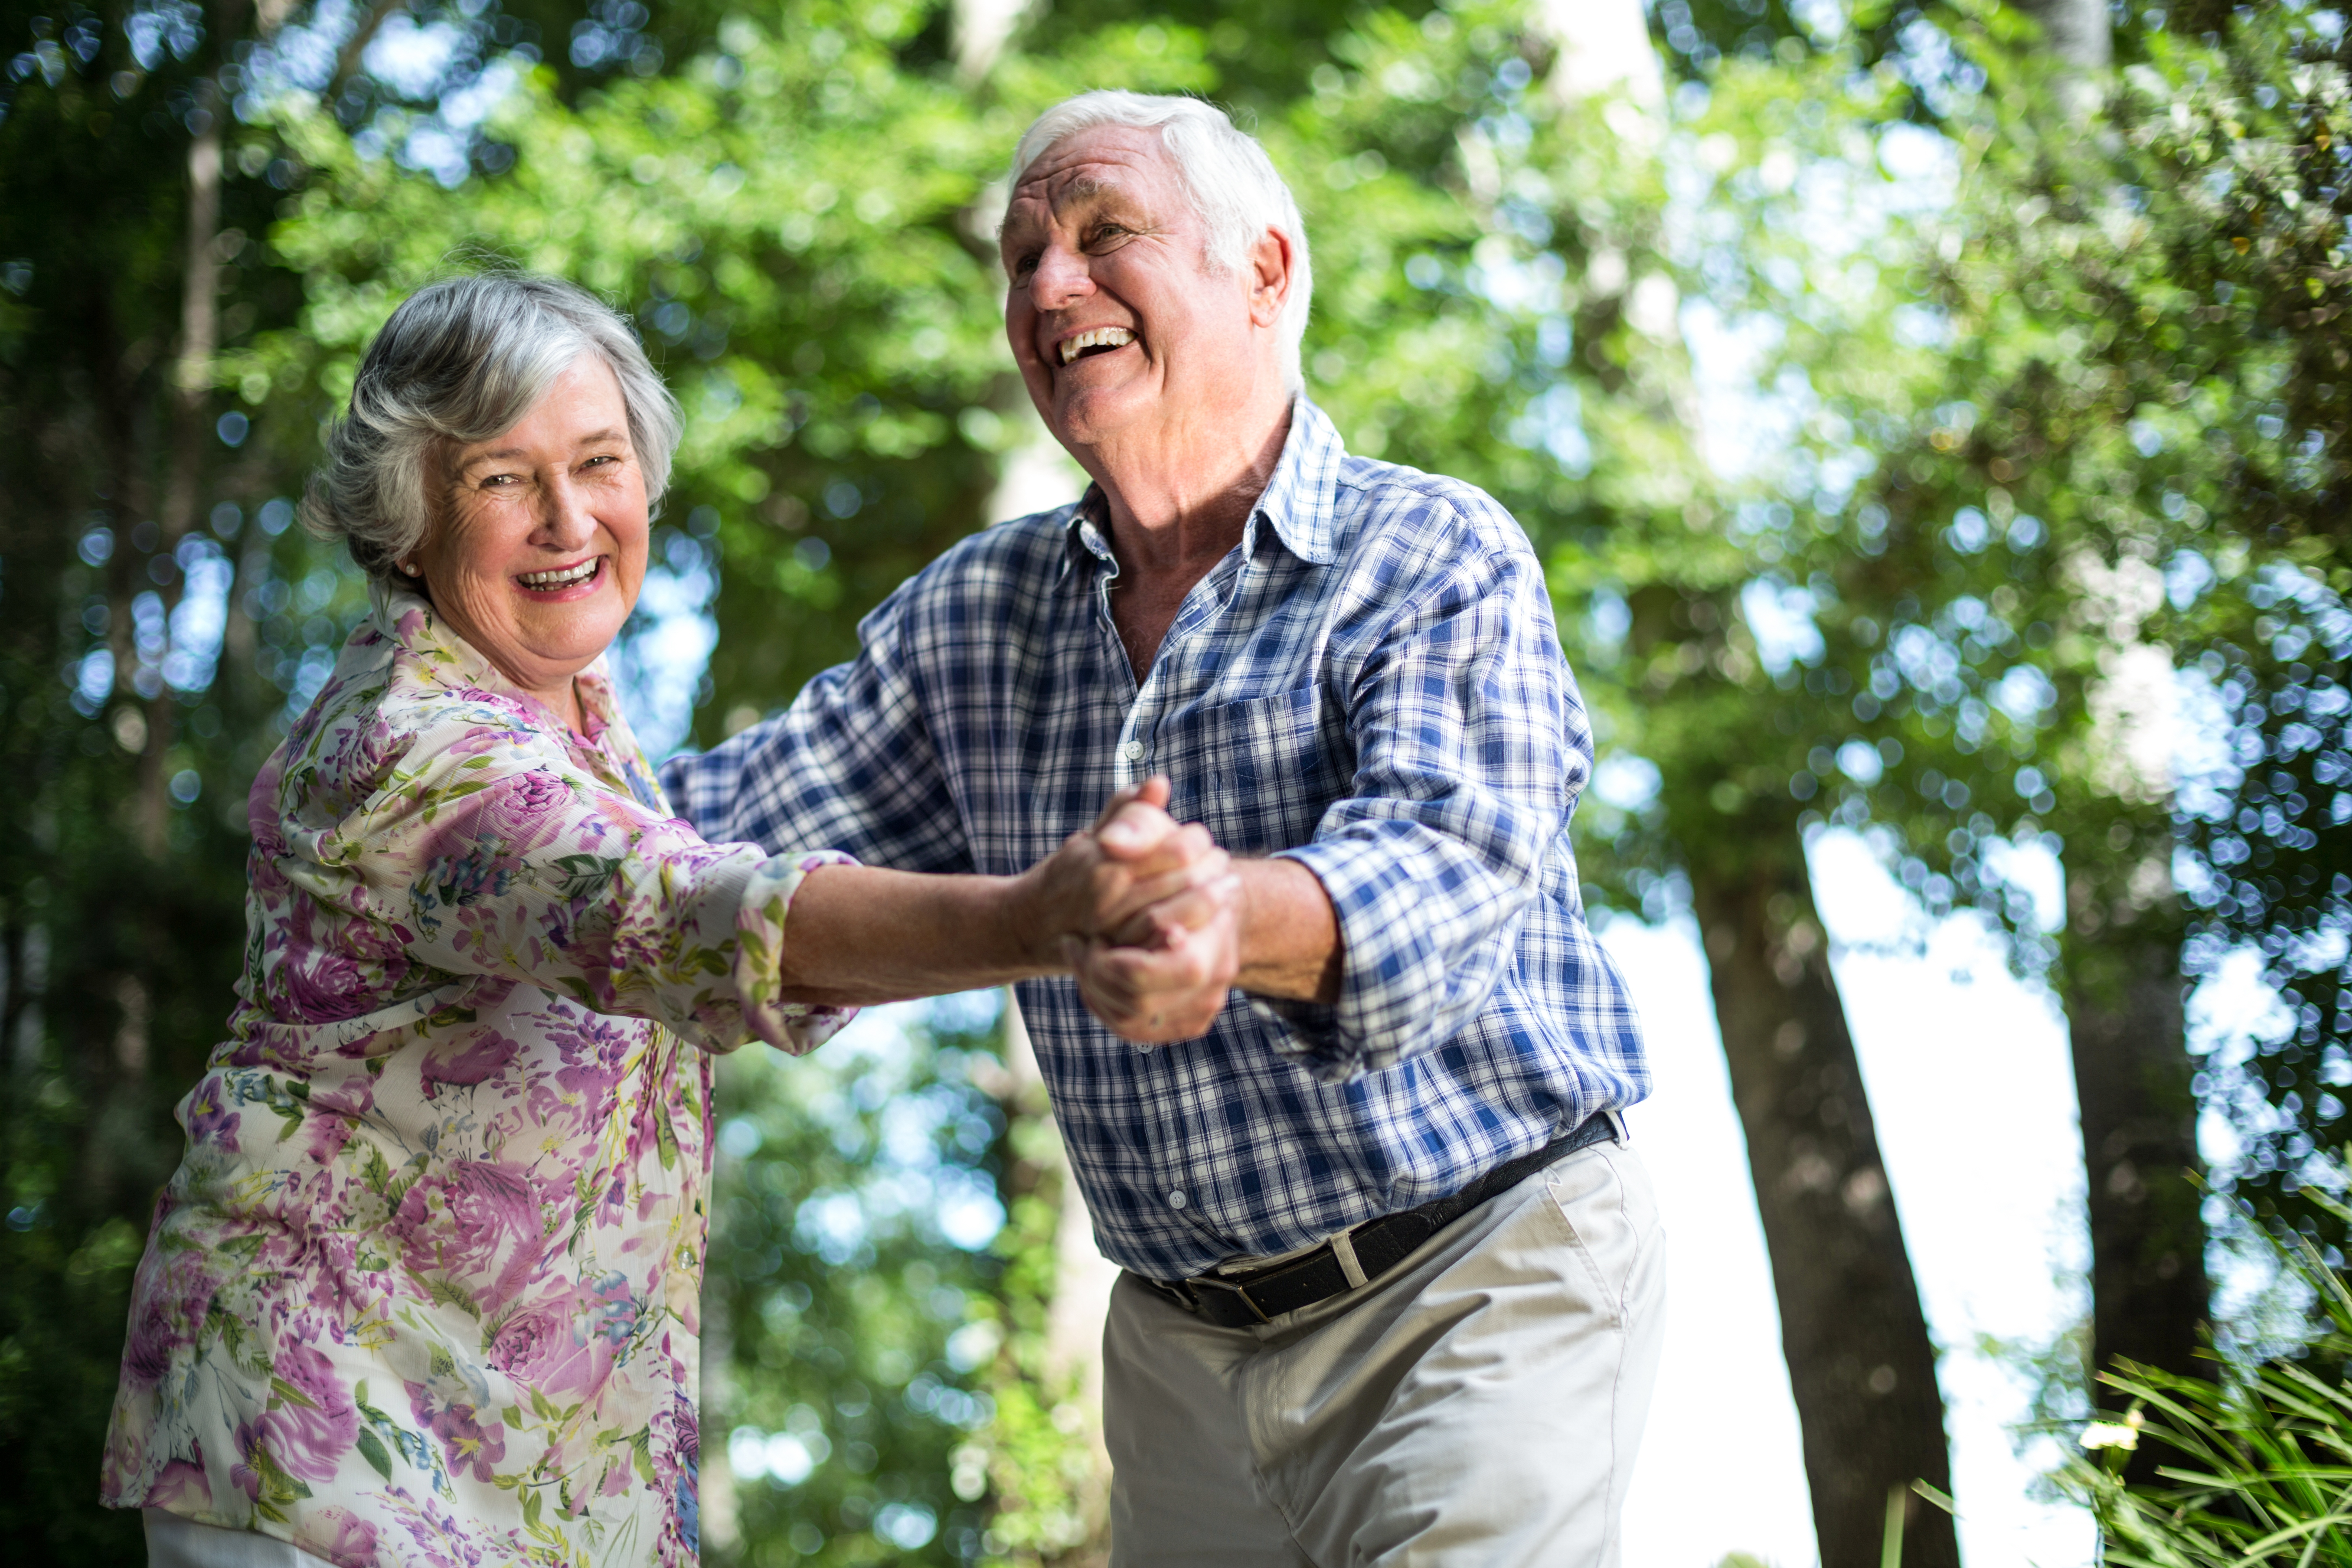 Happy senior woman dancing with husband against trees